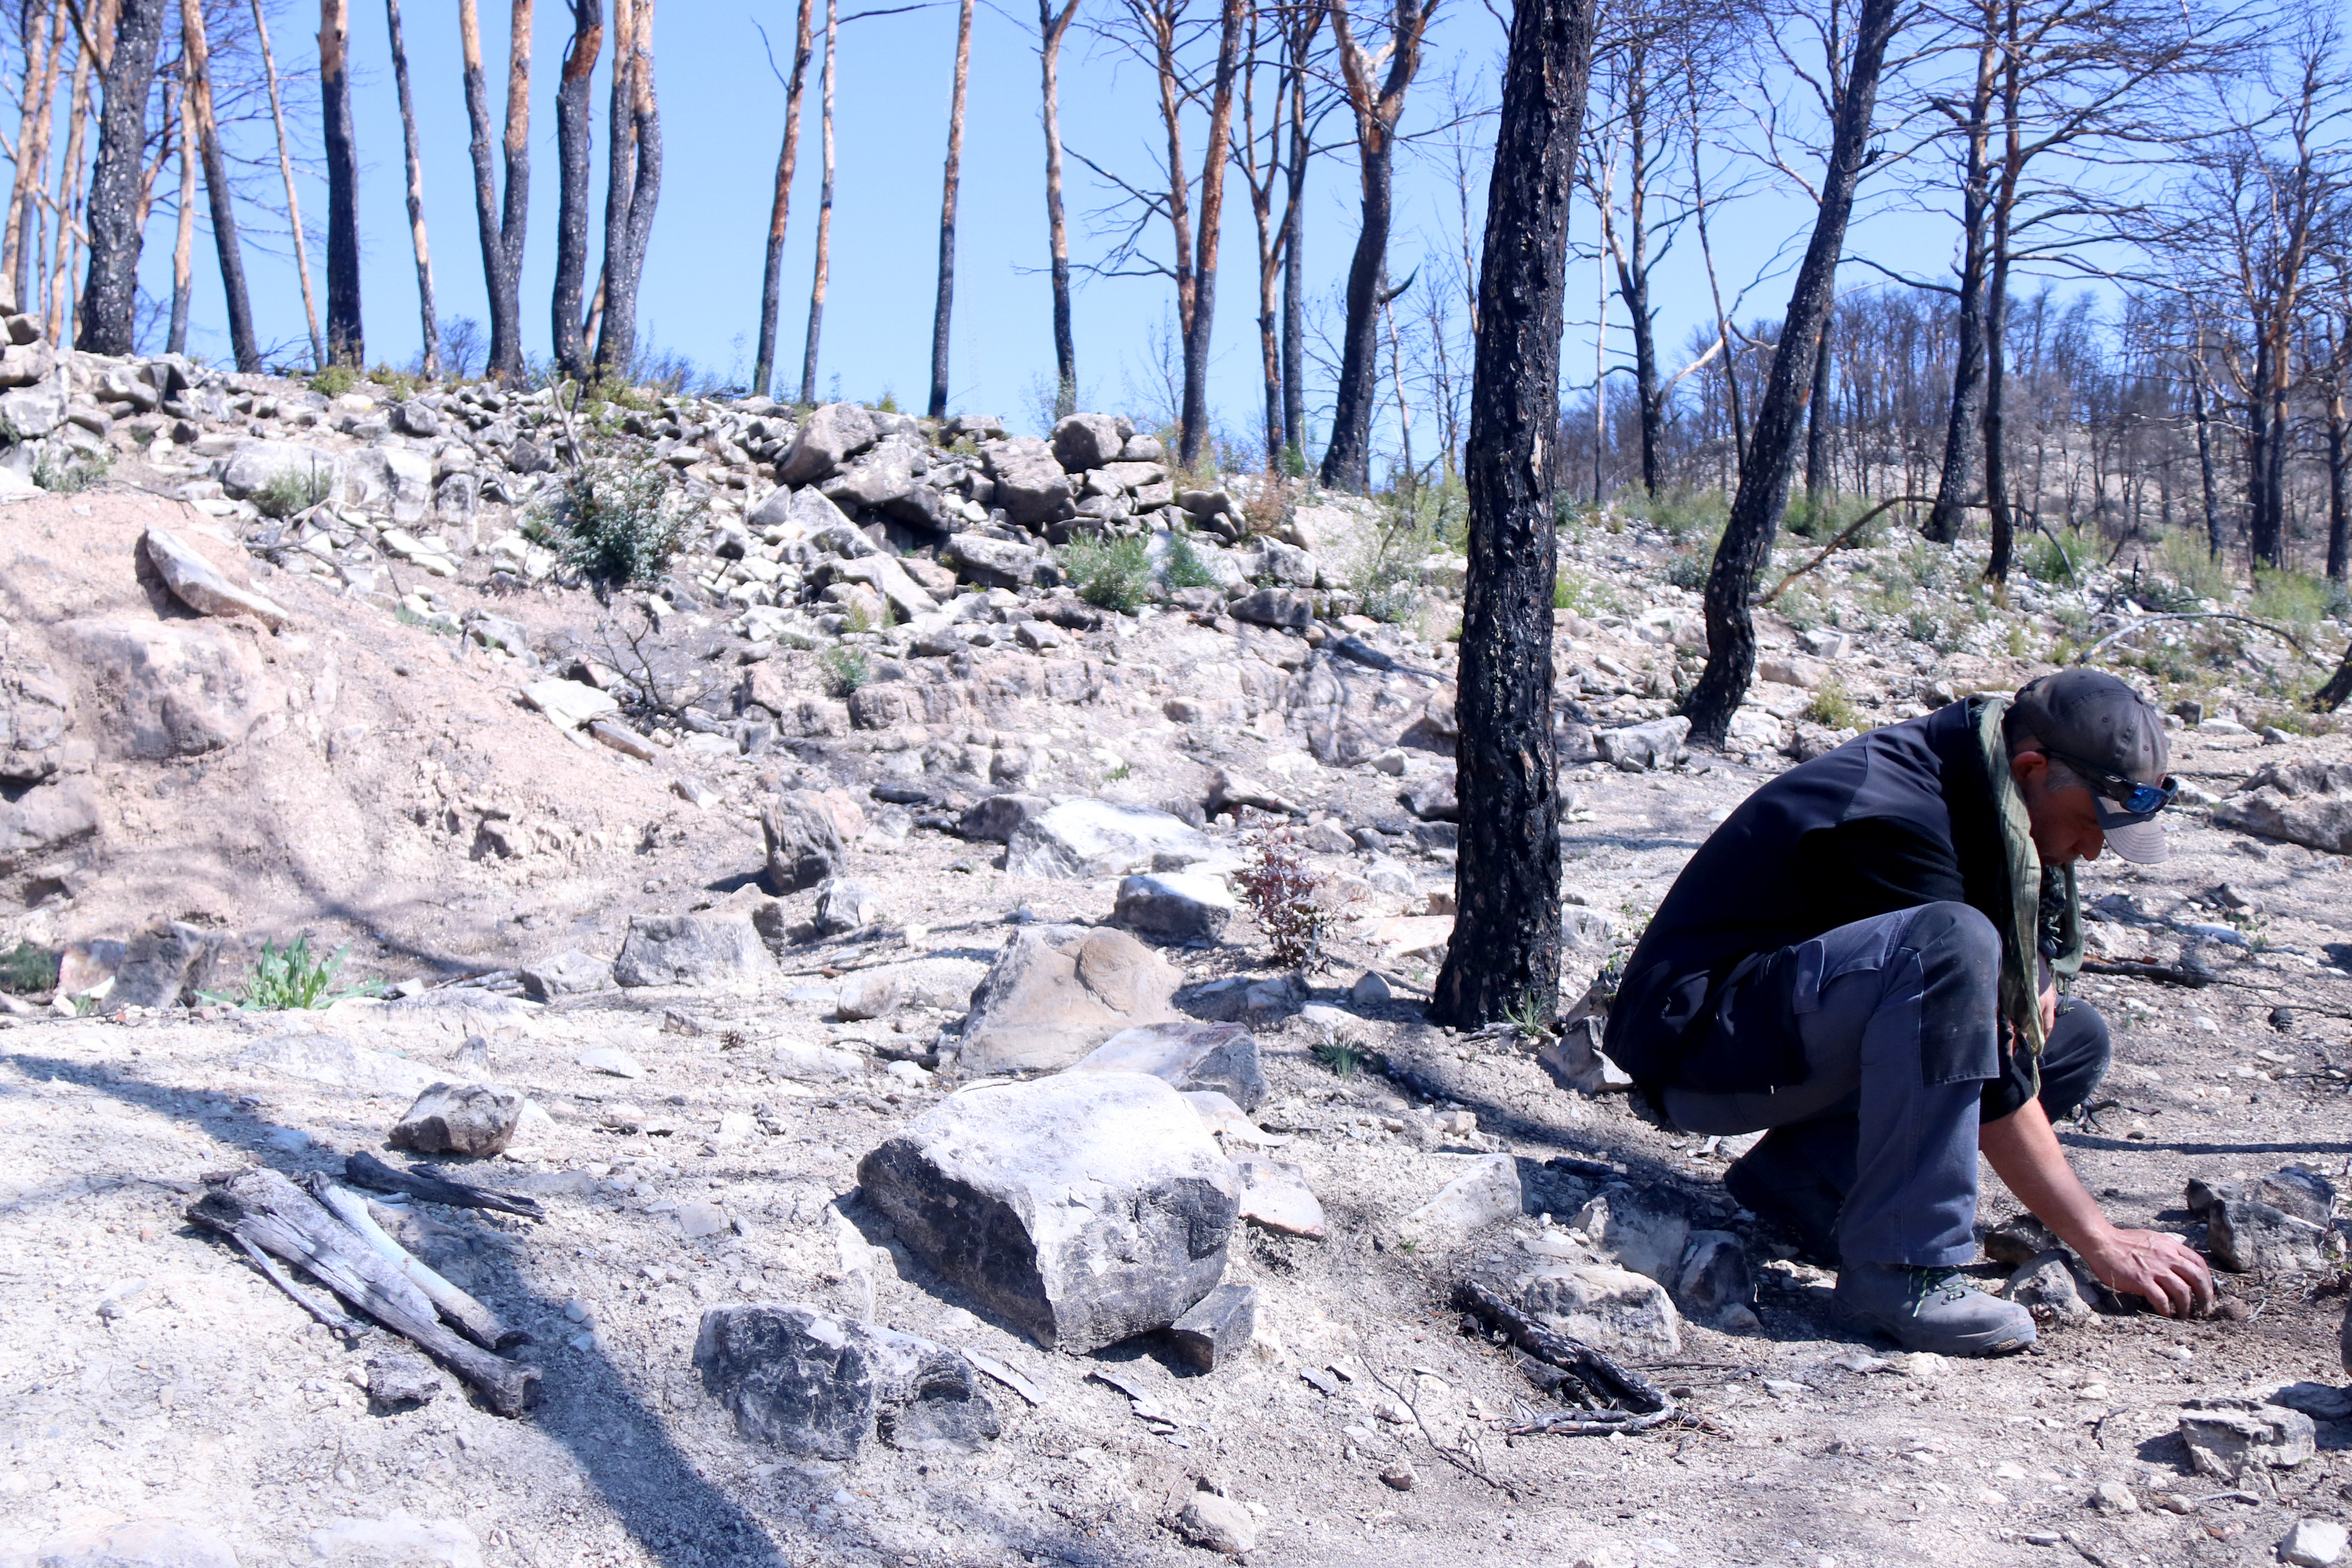 Local Esteve Corbella searches in the burned area in Corbera d'Ebre almost one year after a wildfire, where he found some bones from Spanish civil war soldiers